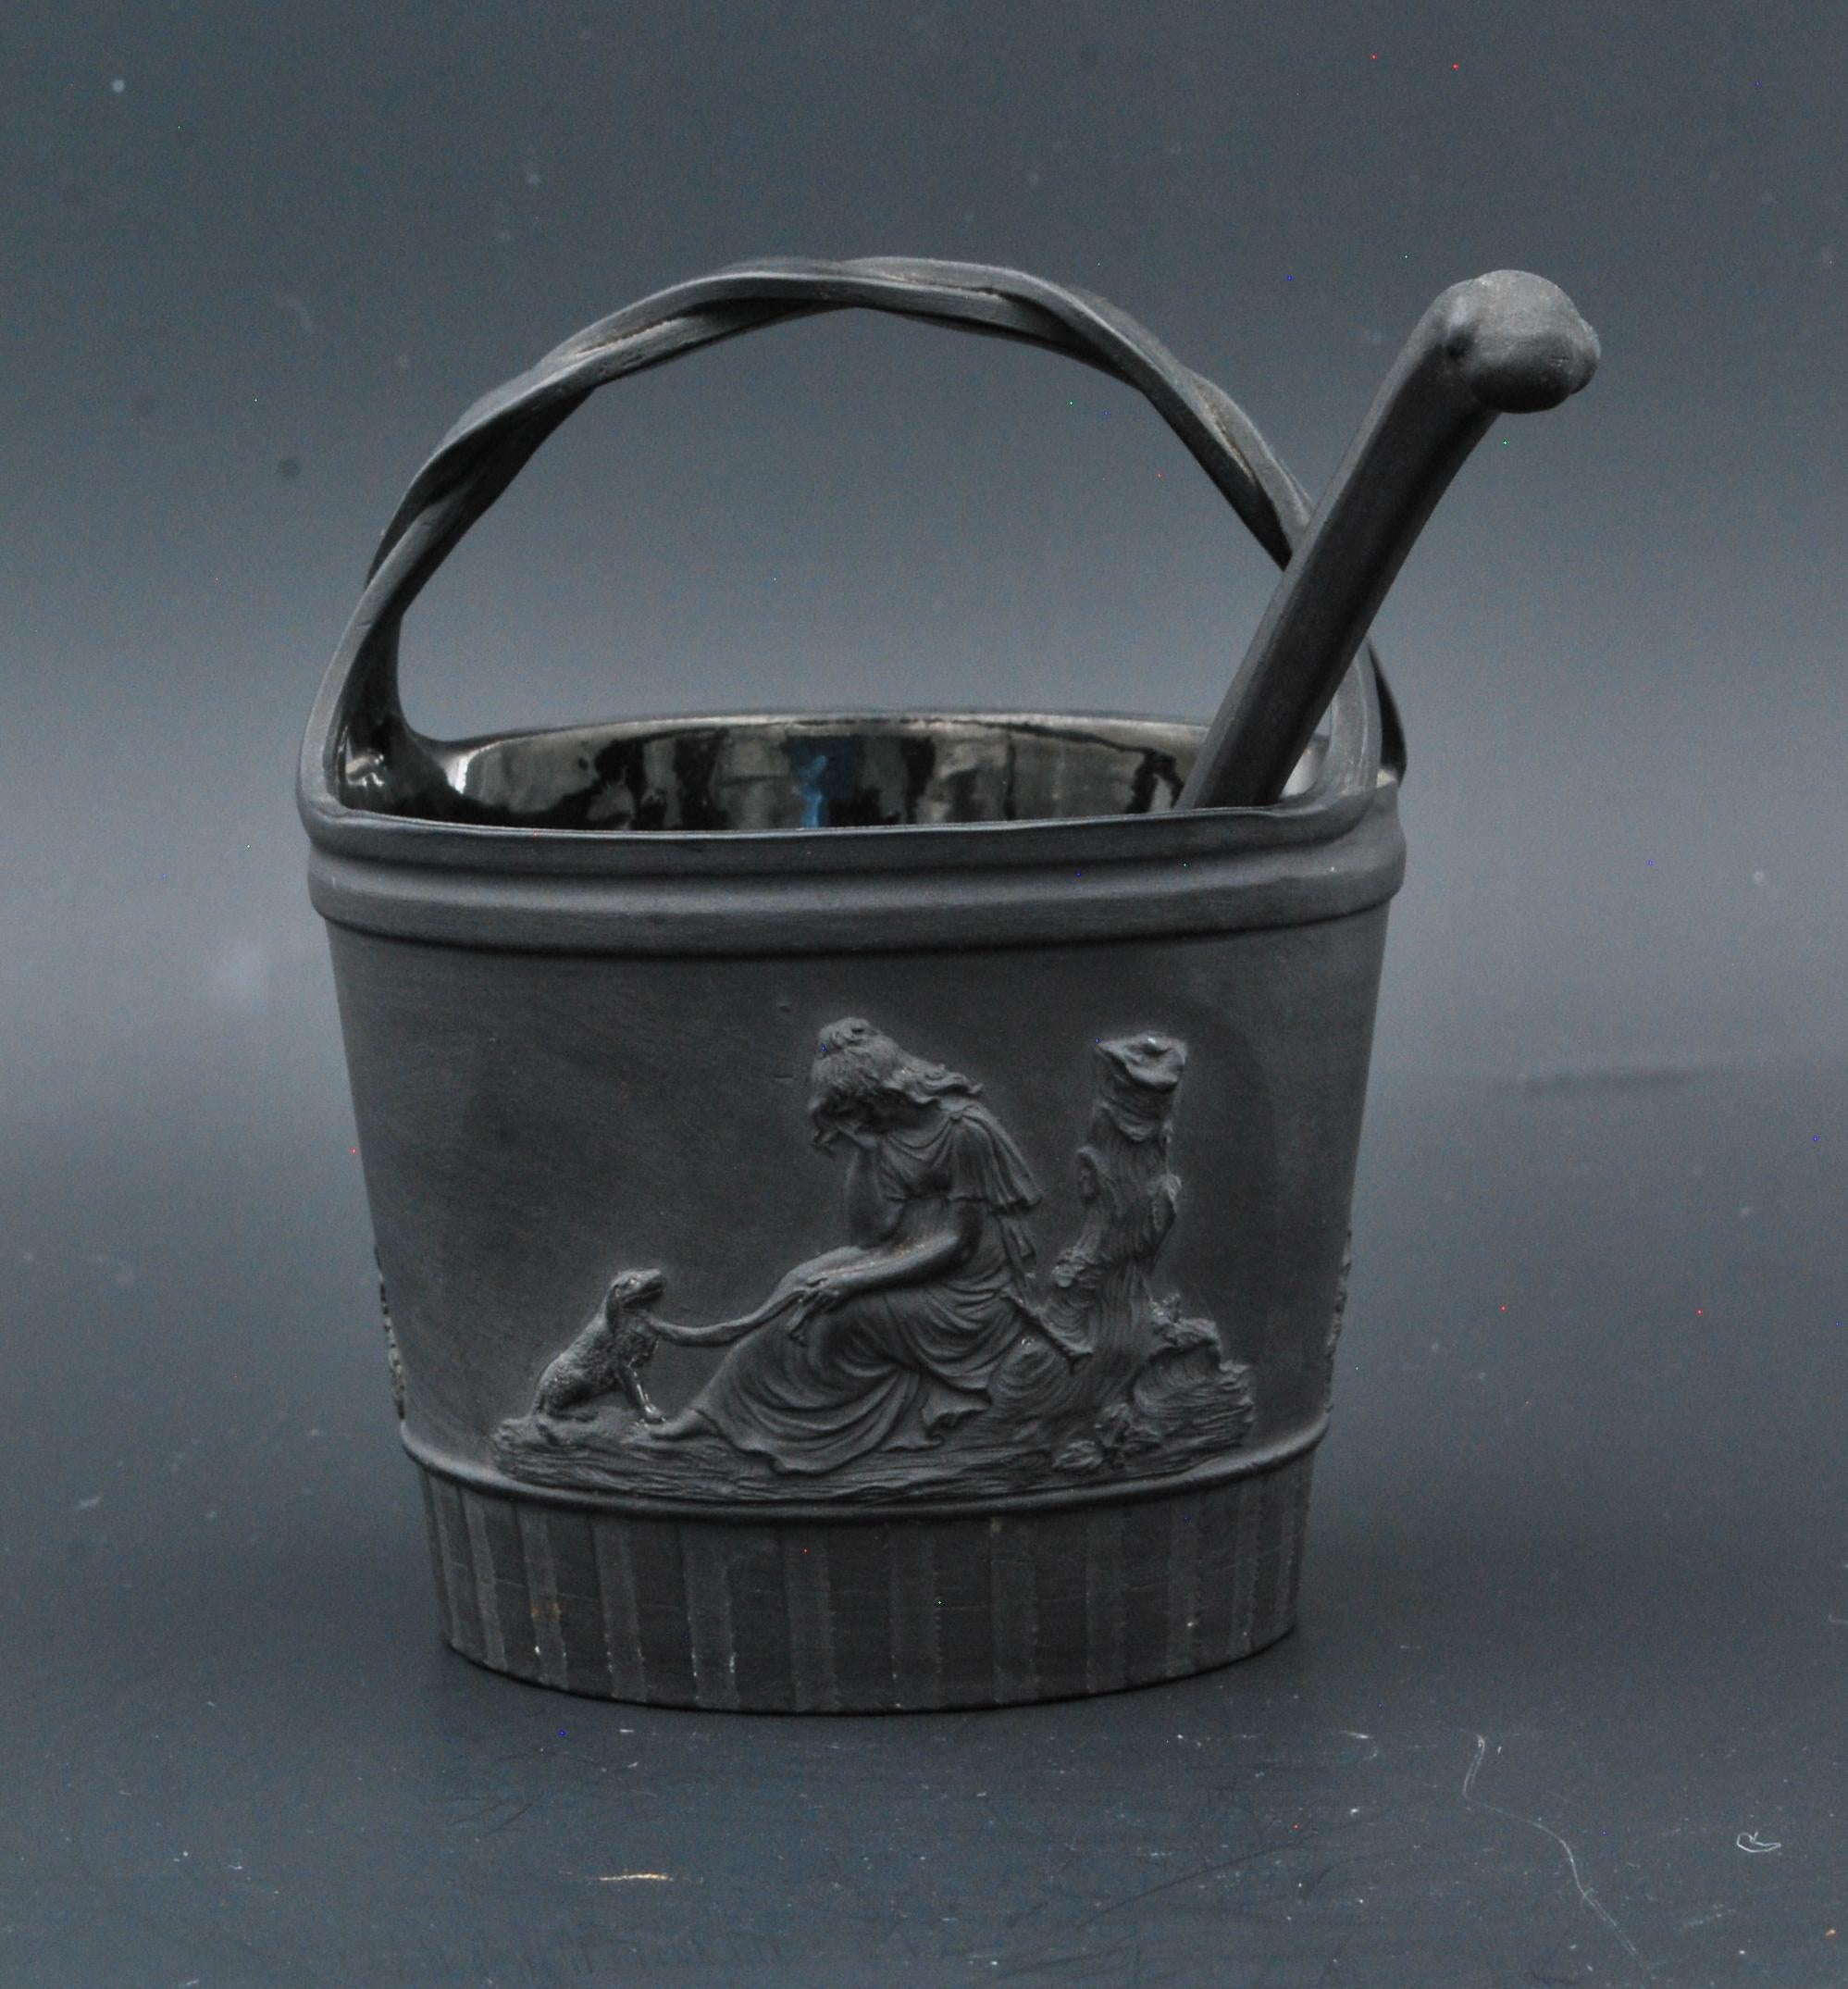 A delightful cream pail in black basalt, decorated with Poor Maria and Charlotte at the Tomb of Werther. The associated makes it very special indeed.